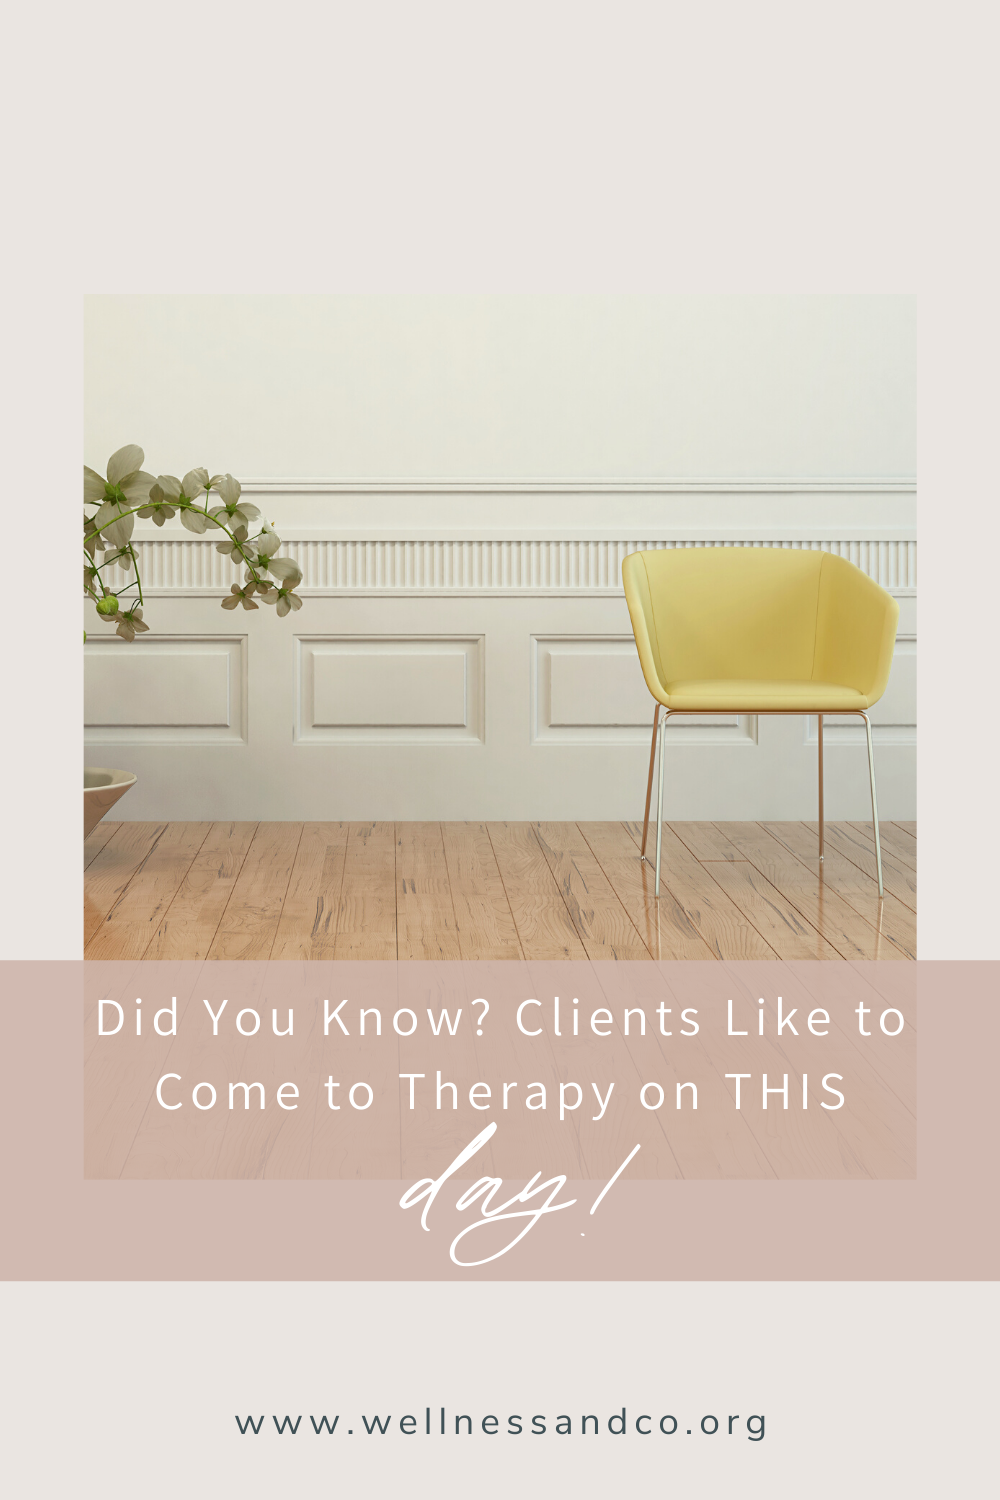 Did You Know? Clients Like to Come to Therapy on THIS Day! | This post explores, in poem form, common days clients like to come in to therapy. This post will uncover what feels special about therapy and why clients wants to come in on those particular days, cheers!